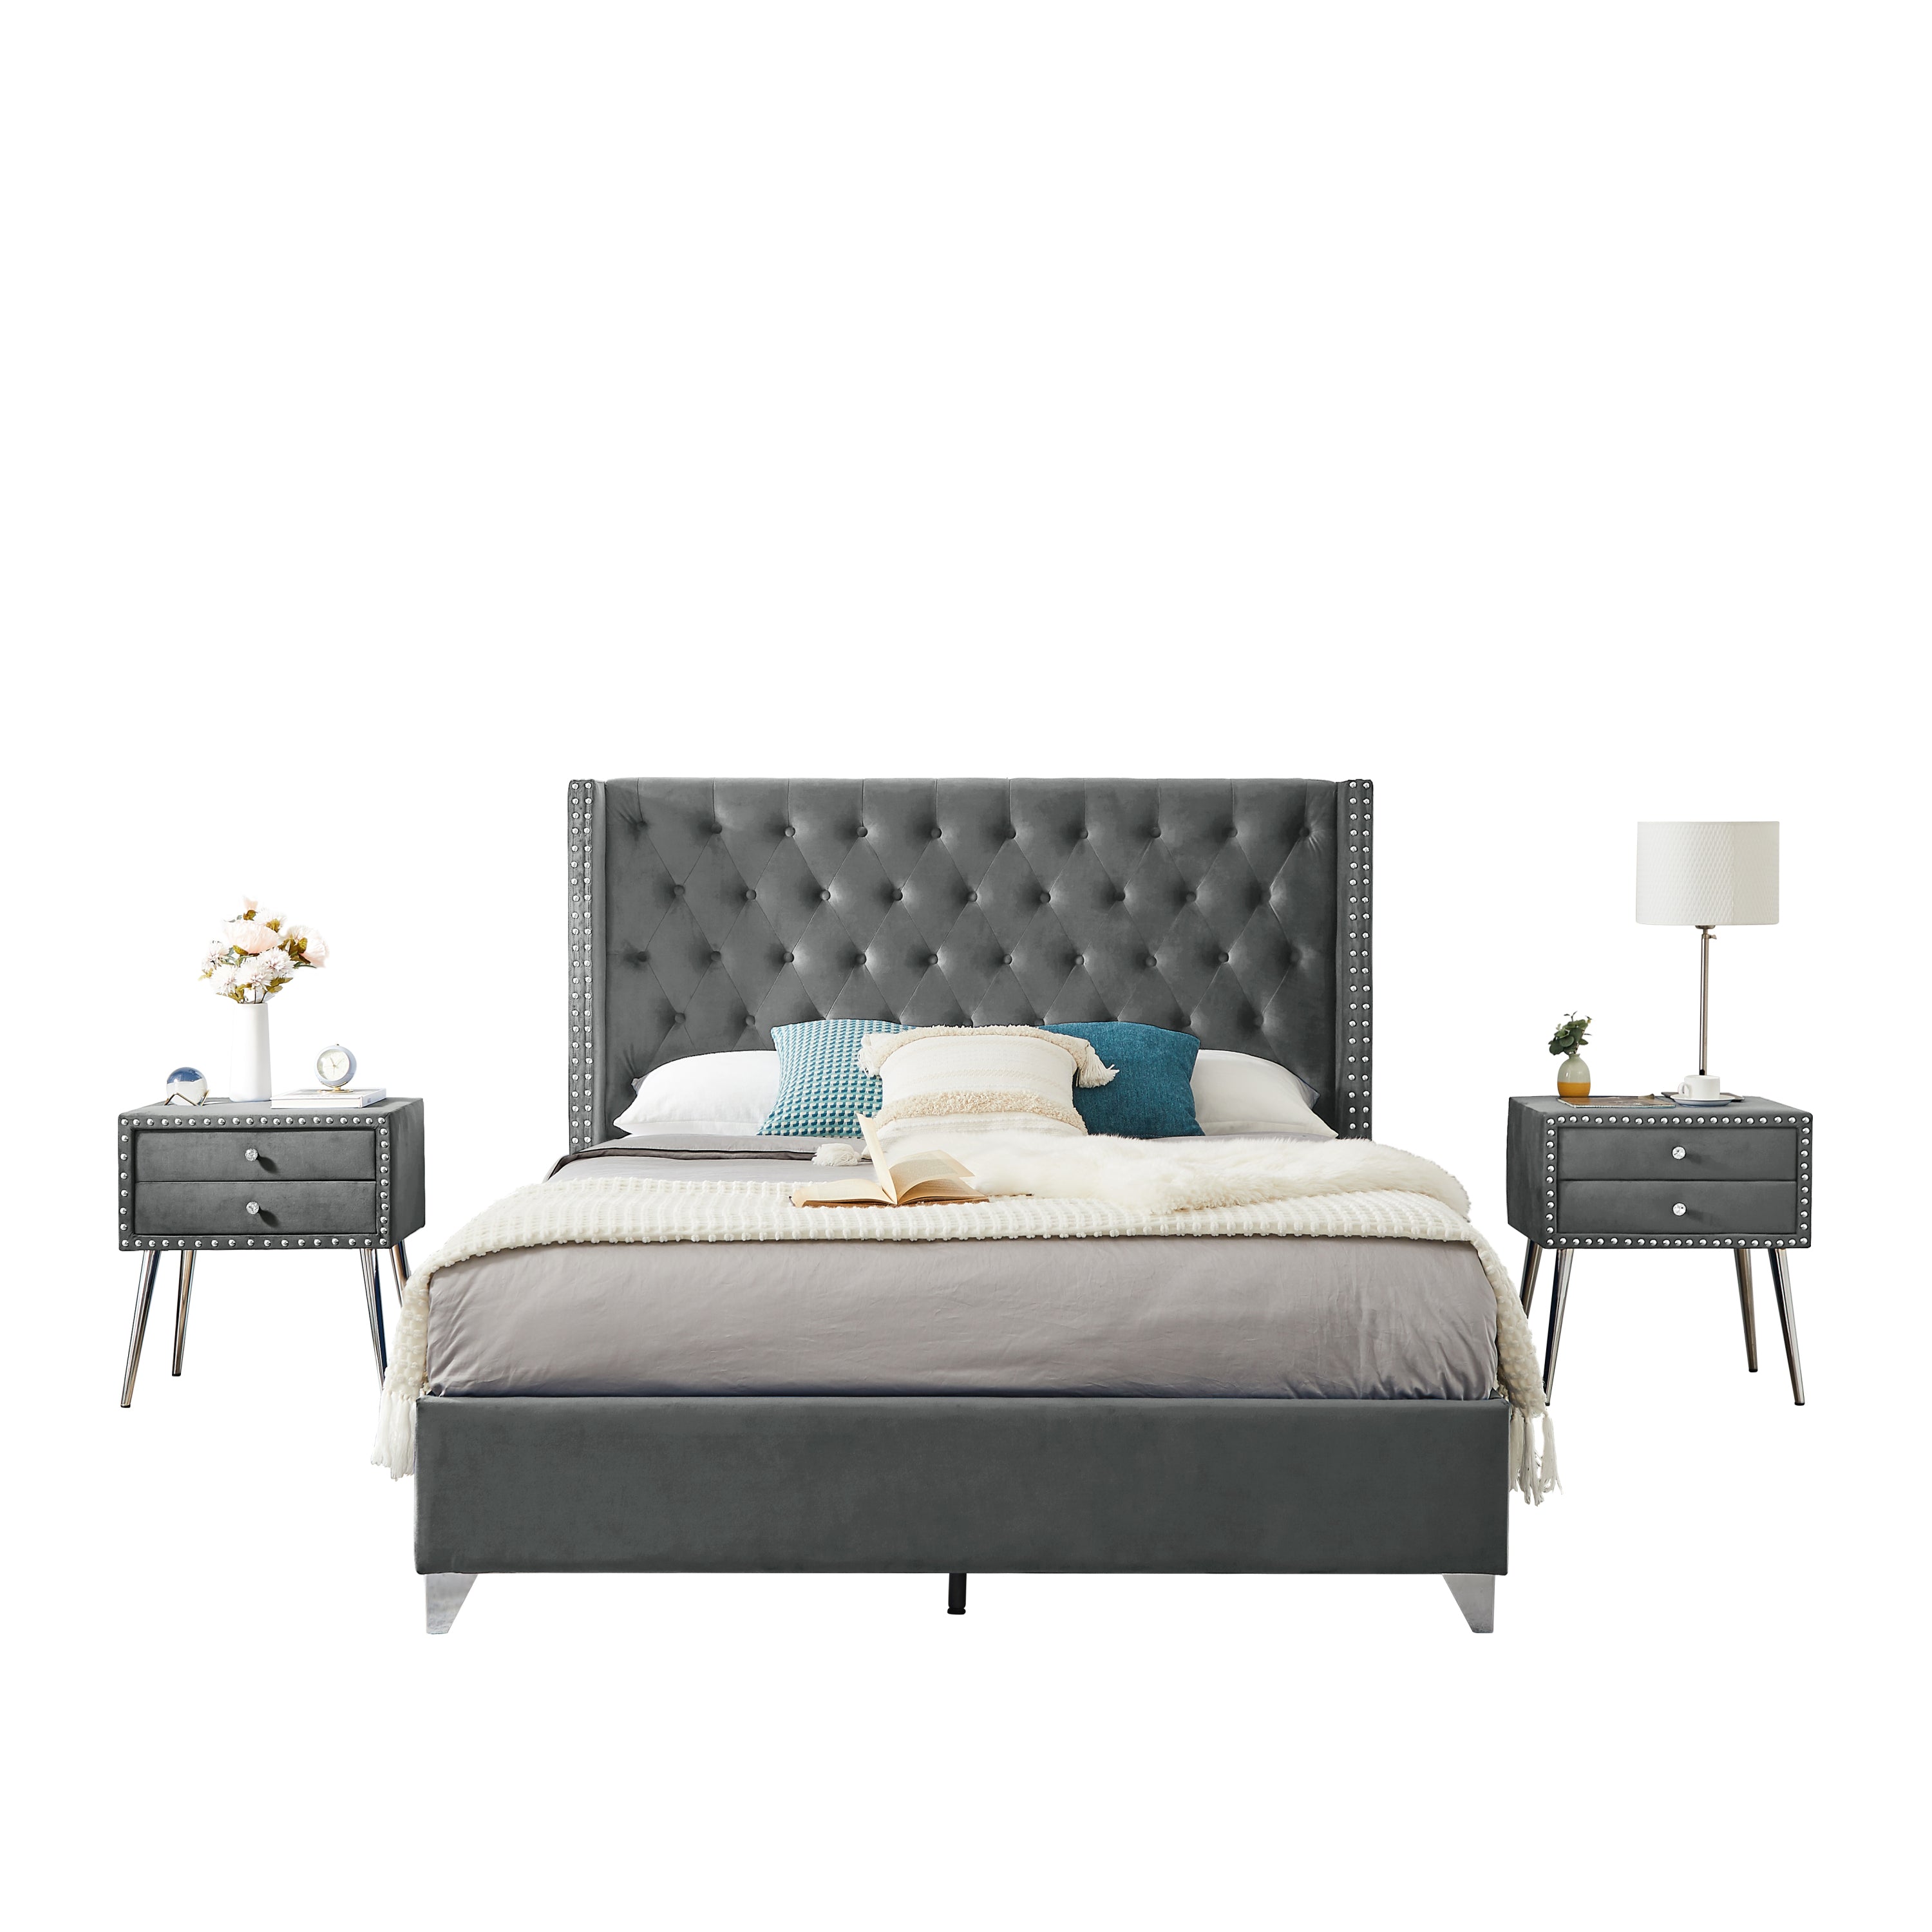 Queen Headboard Bed with Nightstand and Wooden Slats By: Alabama Beds